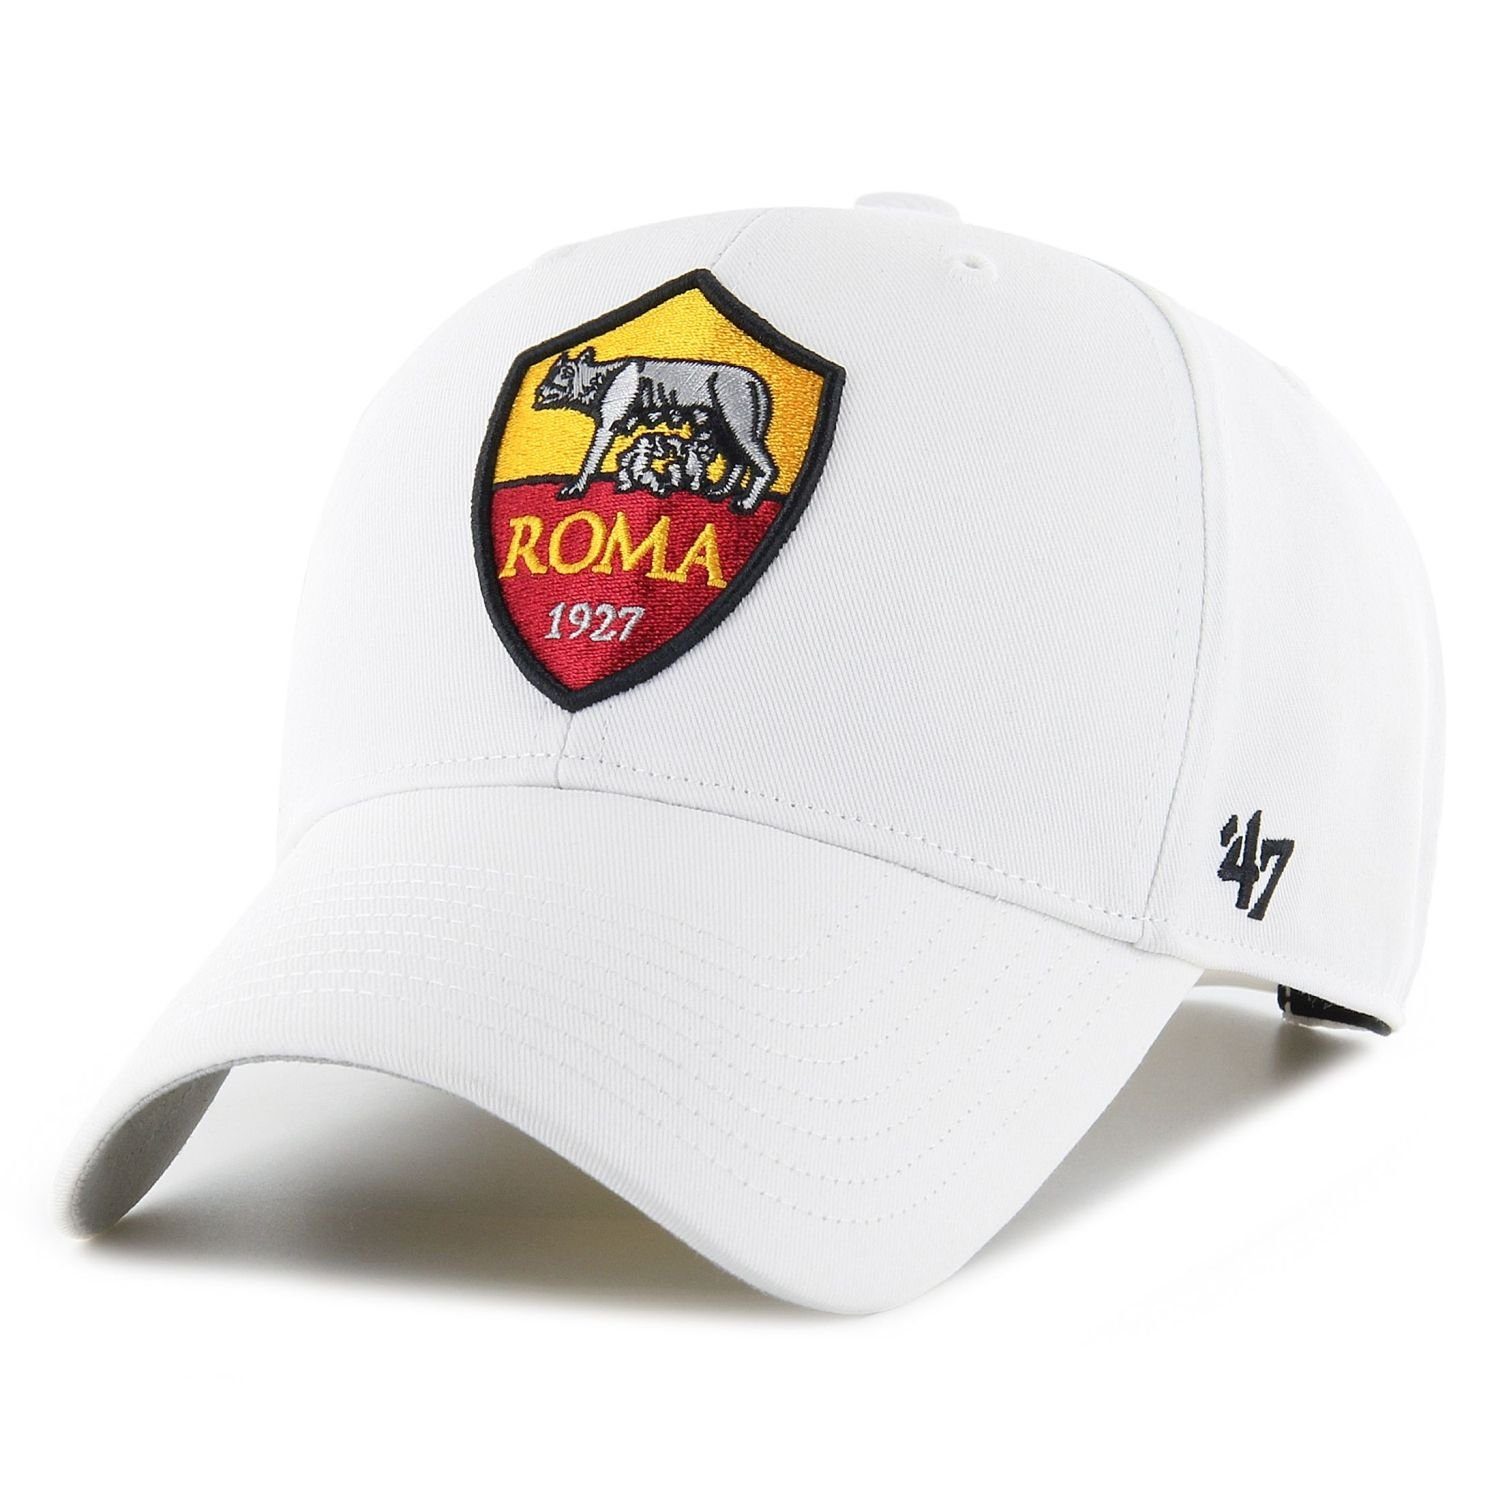 x27;47 Brand Curved Roma Cap Trucker AS